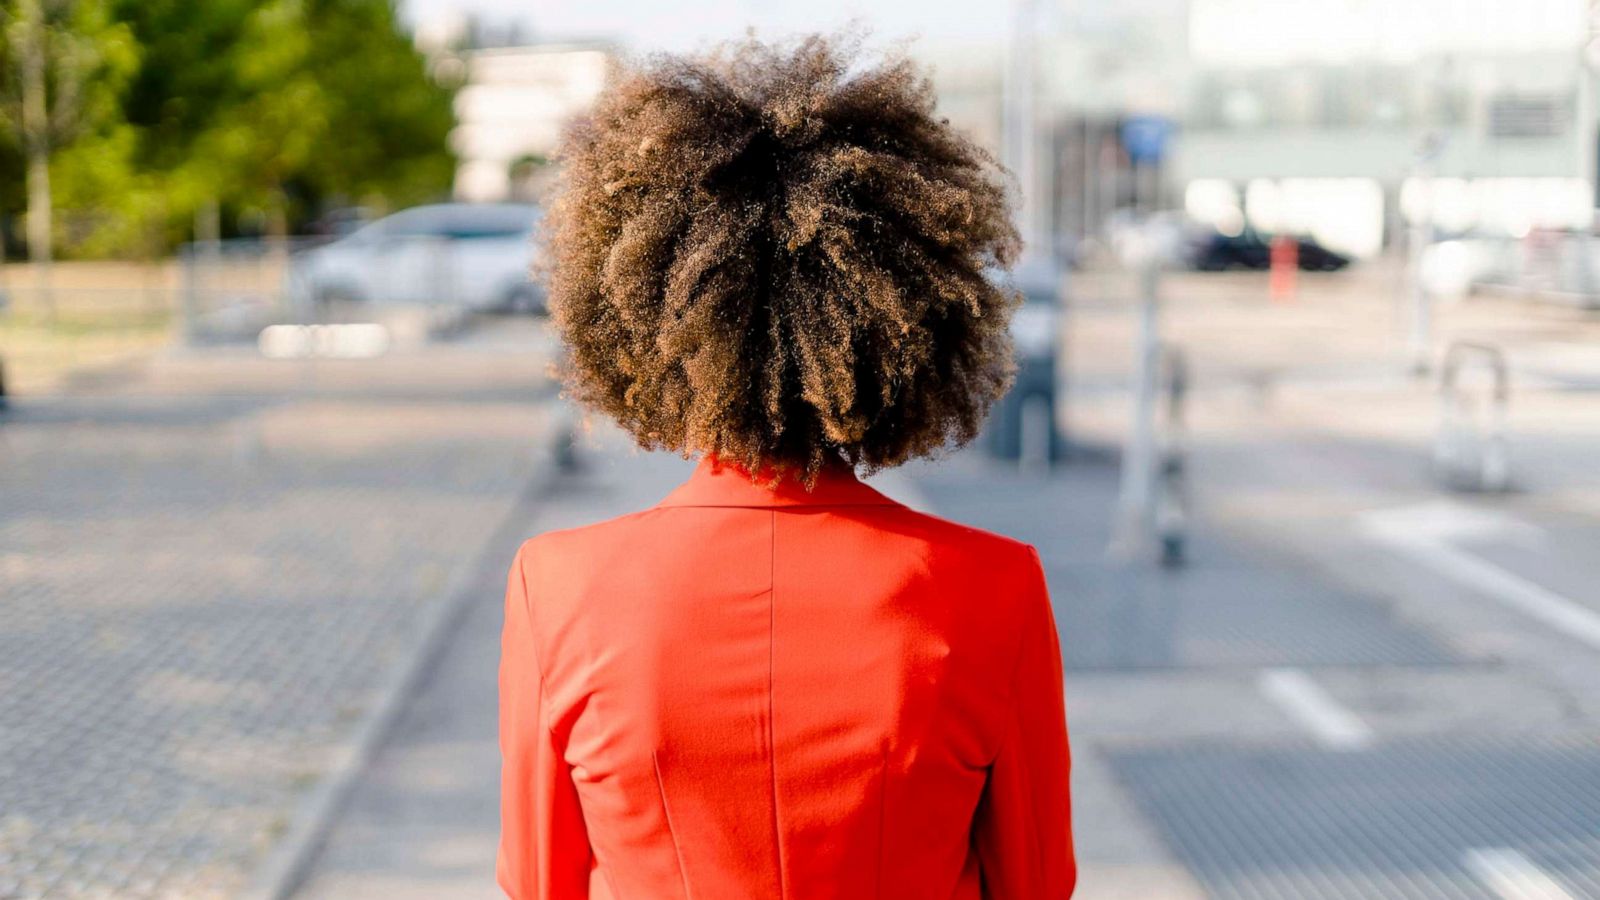 PHOTO: Back view of a young woman wearing fashionable red suit jacket.